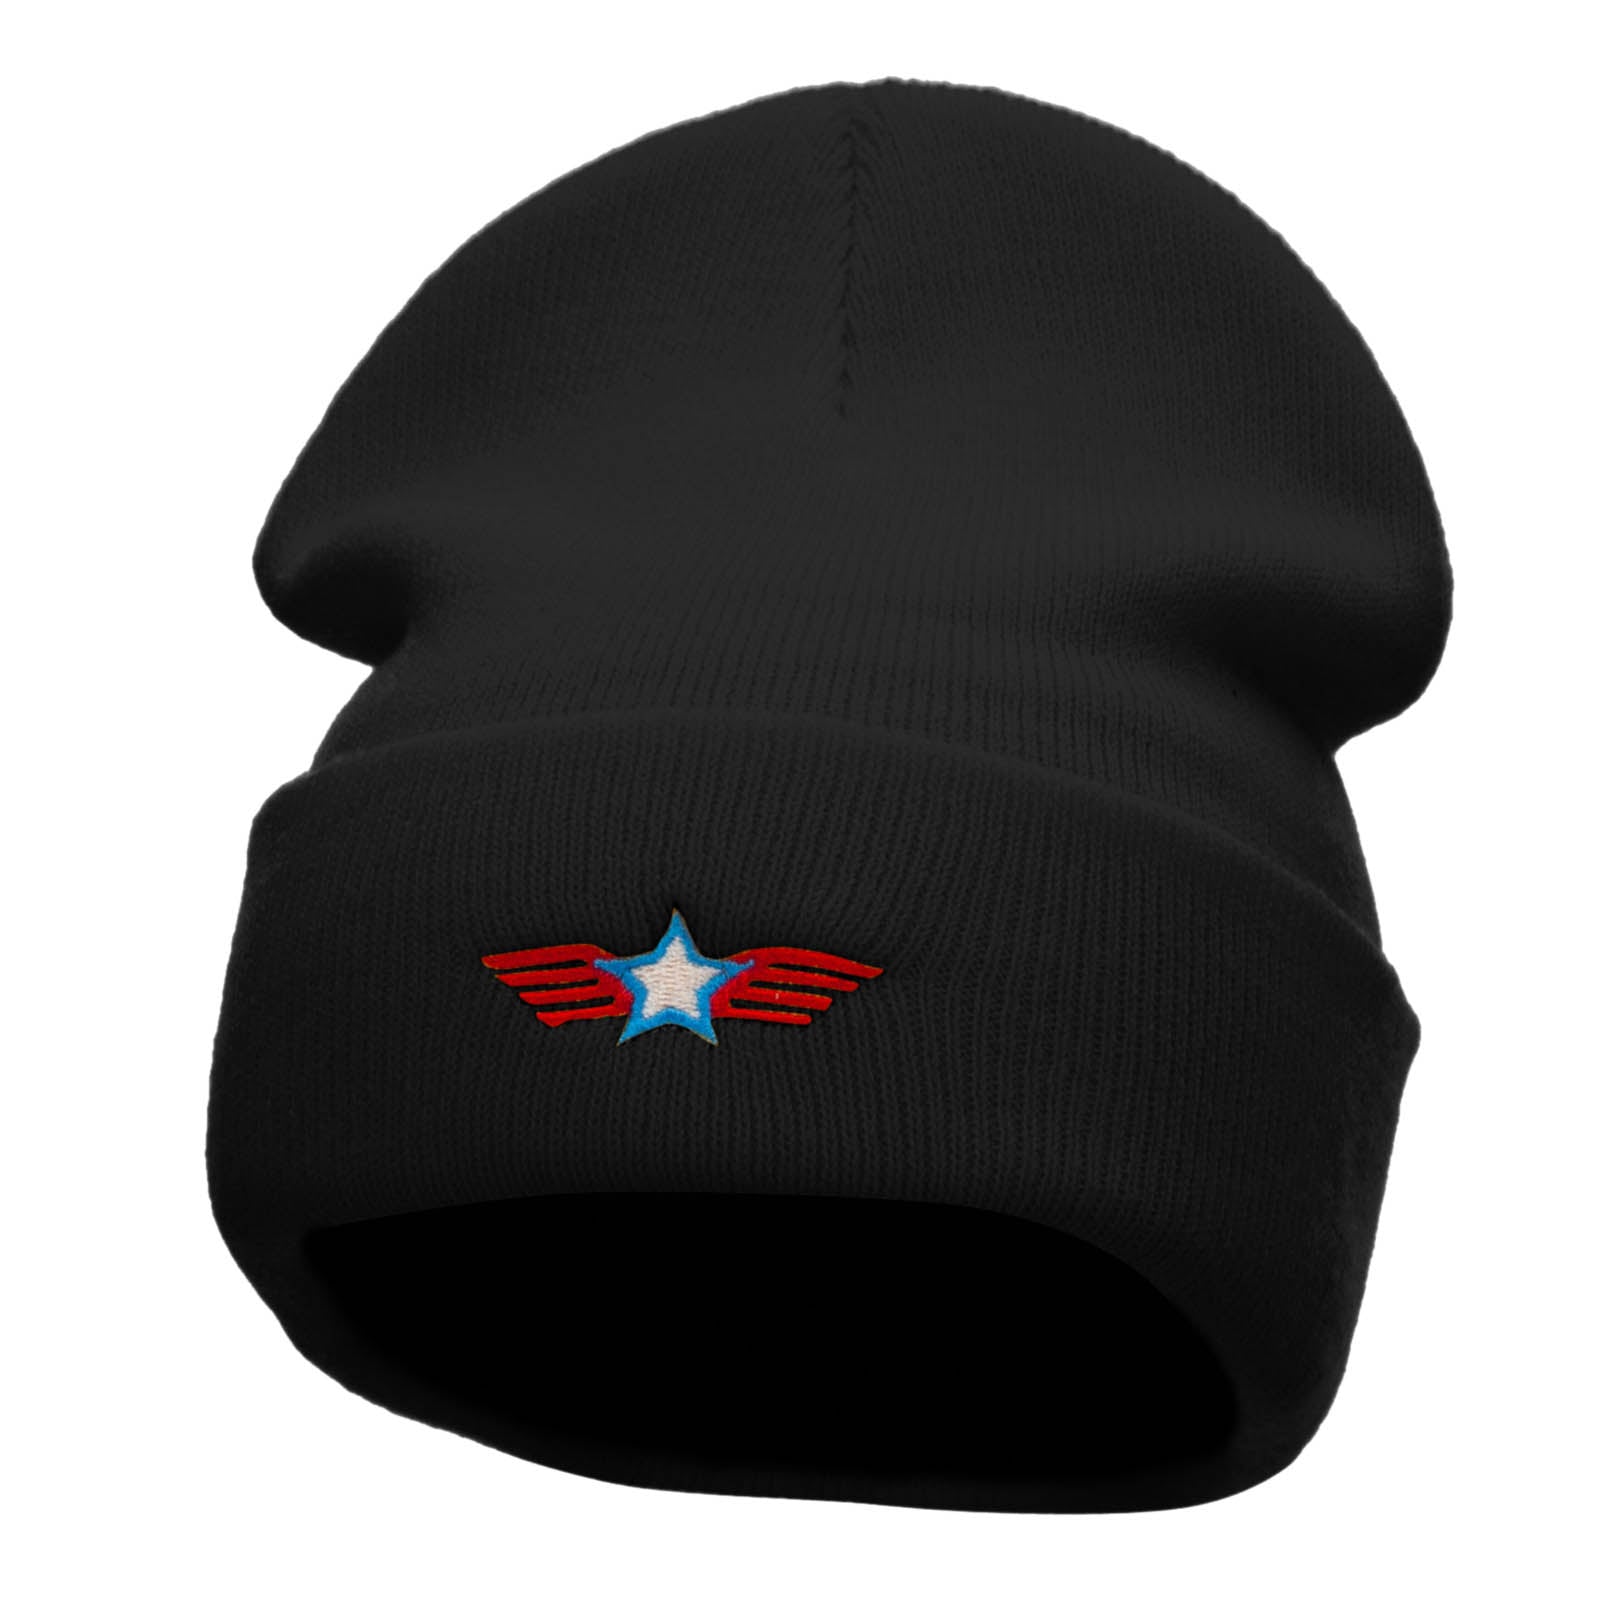 Winged Star Embroidered 12 Inch Long Knitted Beanie - Black OSFM